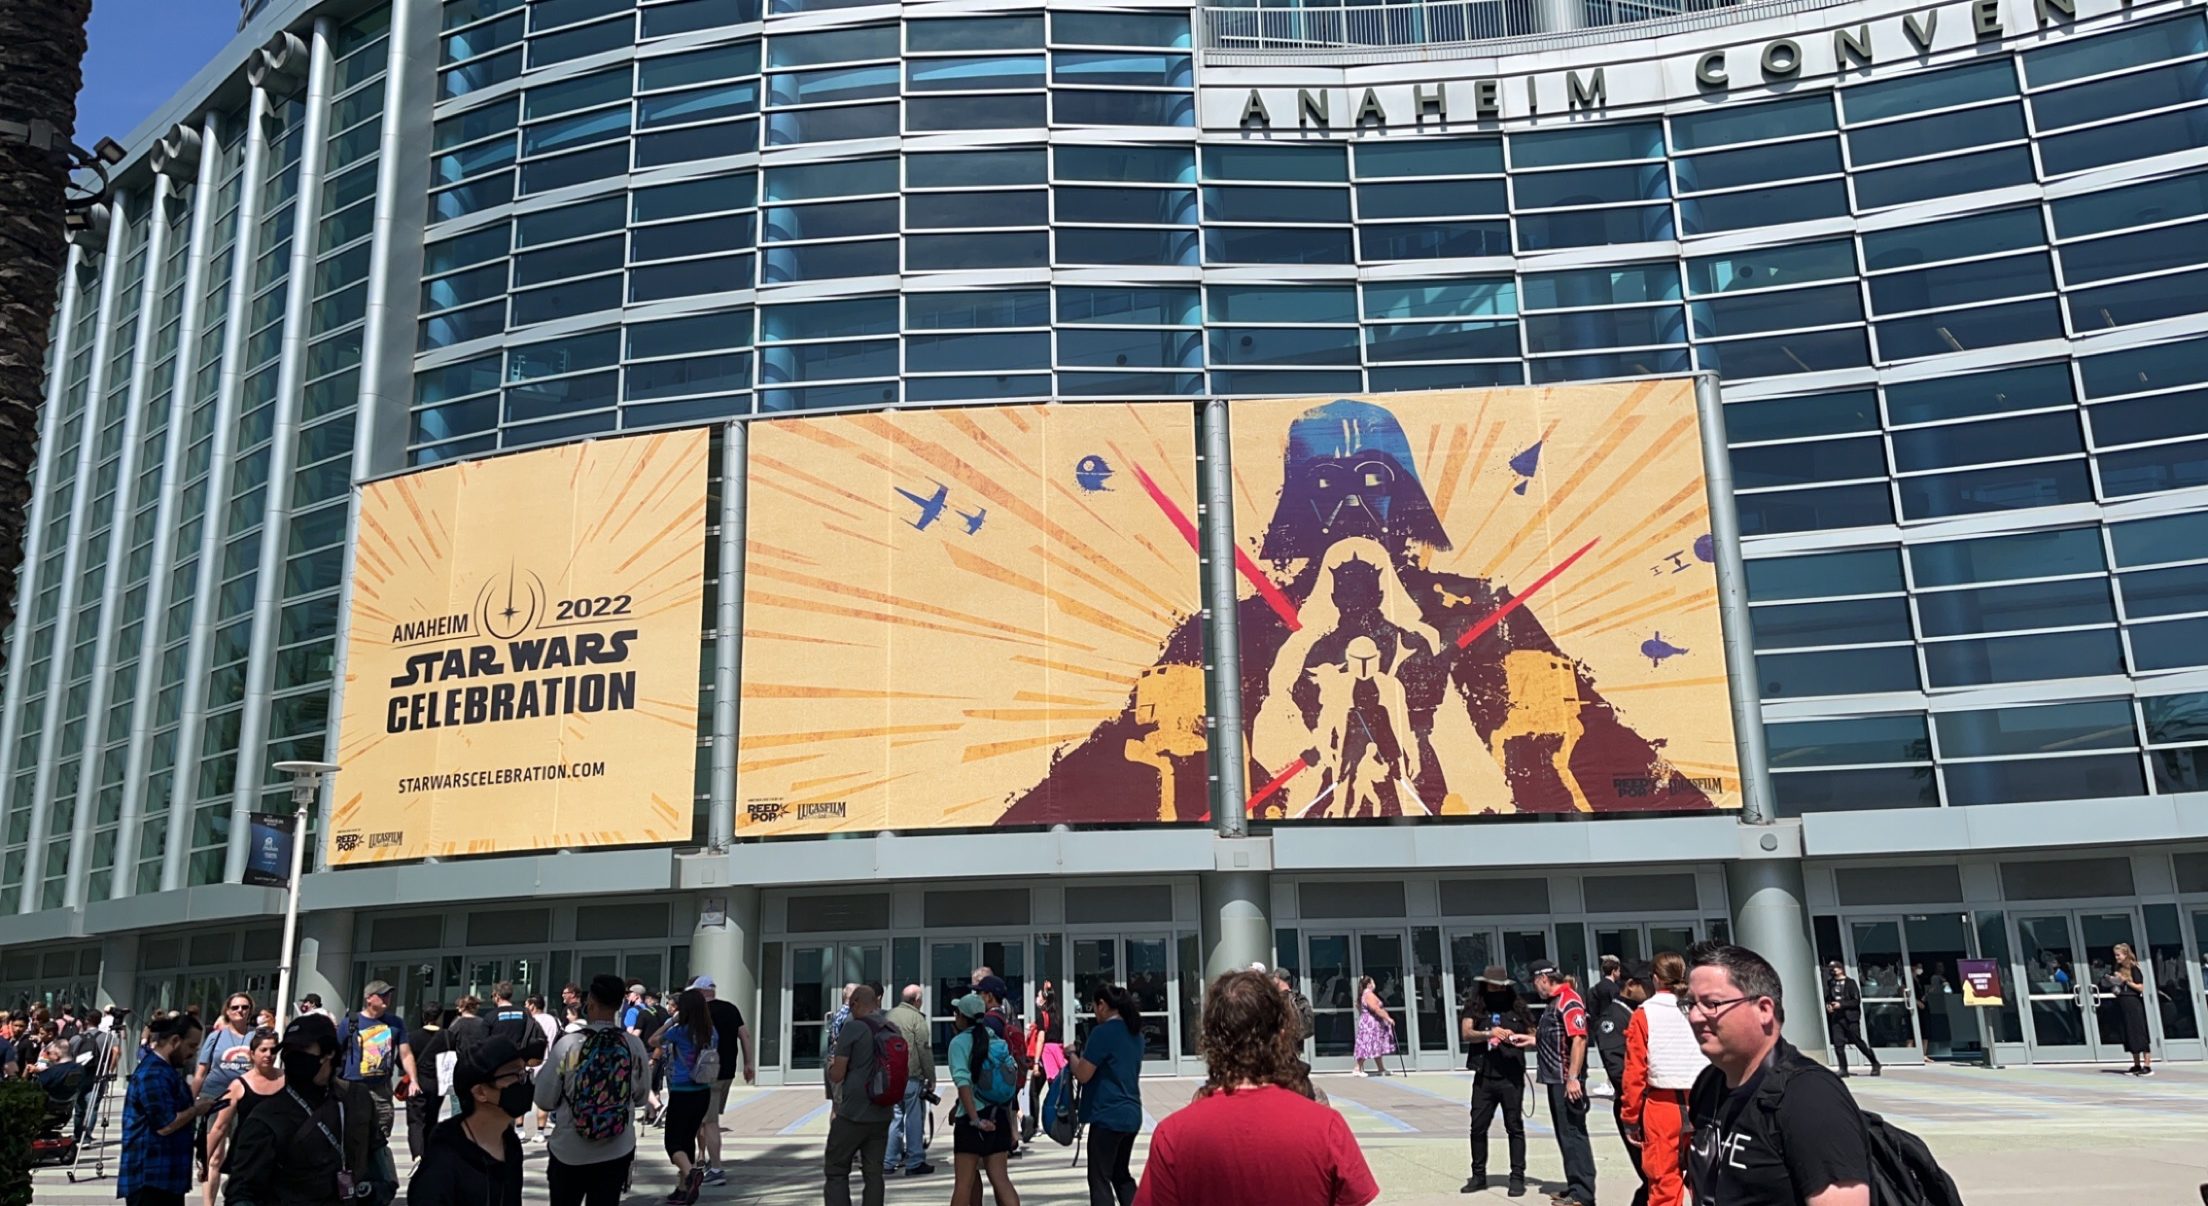 A Picture of the Star Wars Celebration Banner